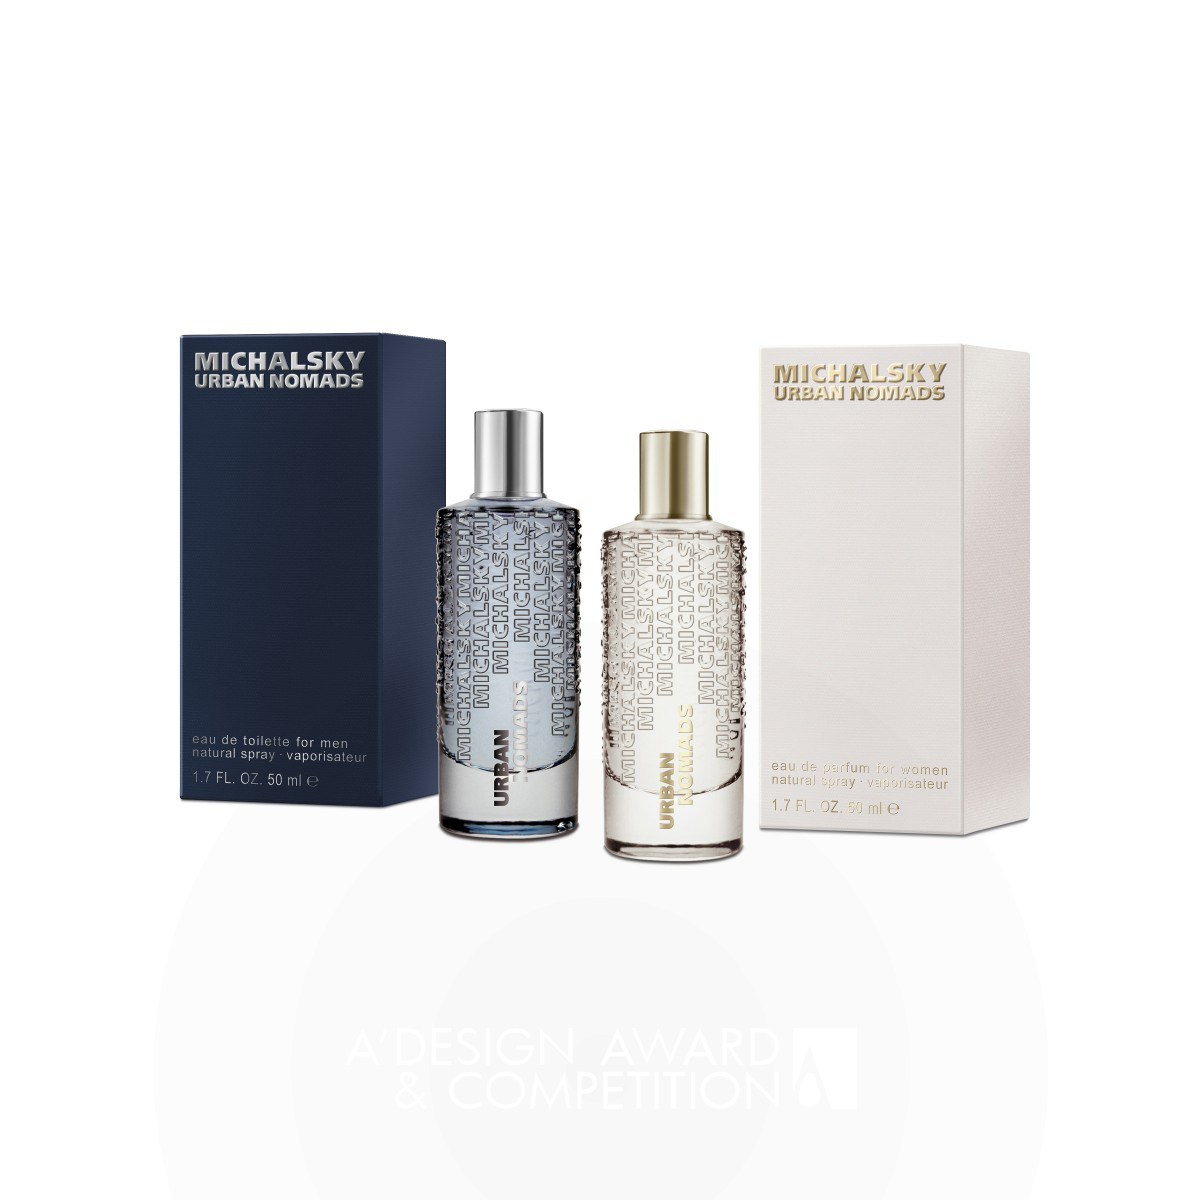 Michalsky Urban Nomads Perfume by Peter Schmidt